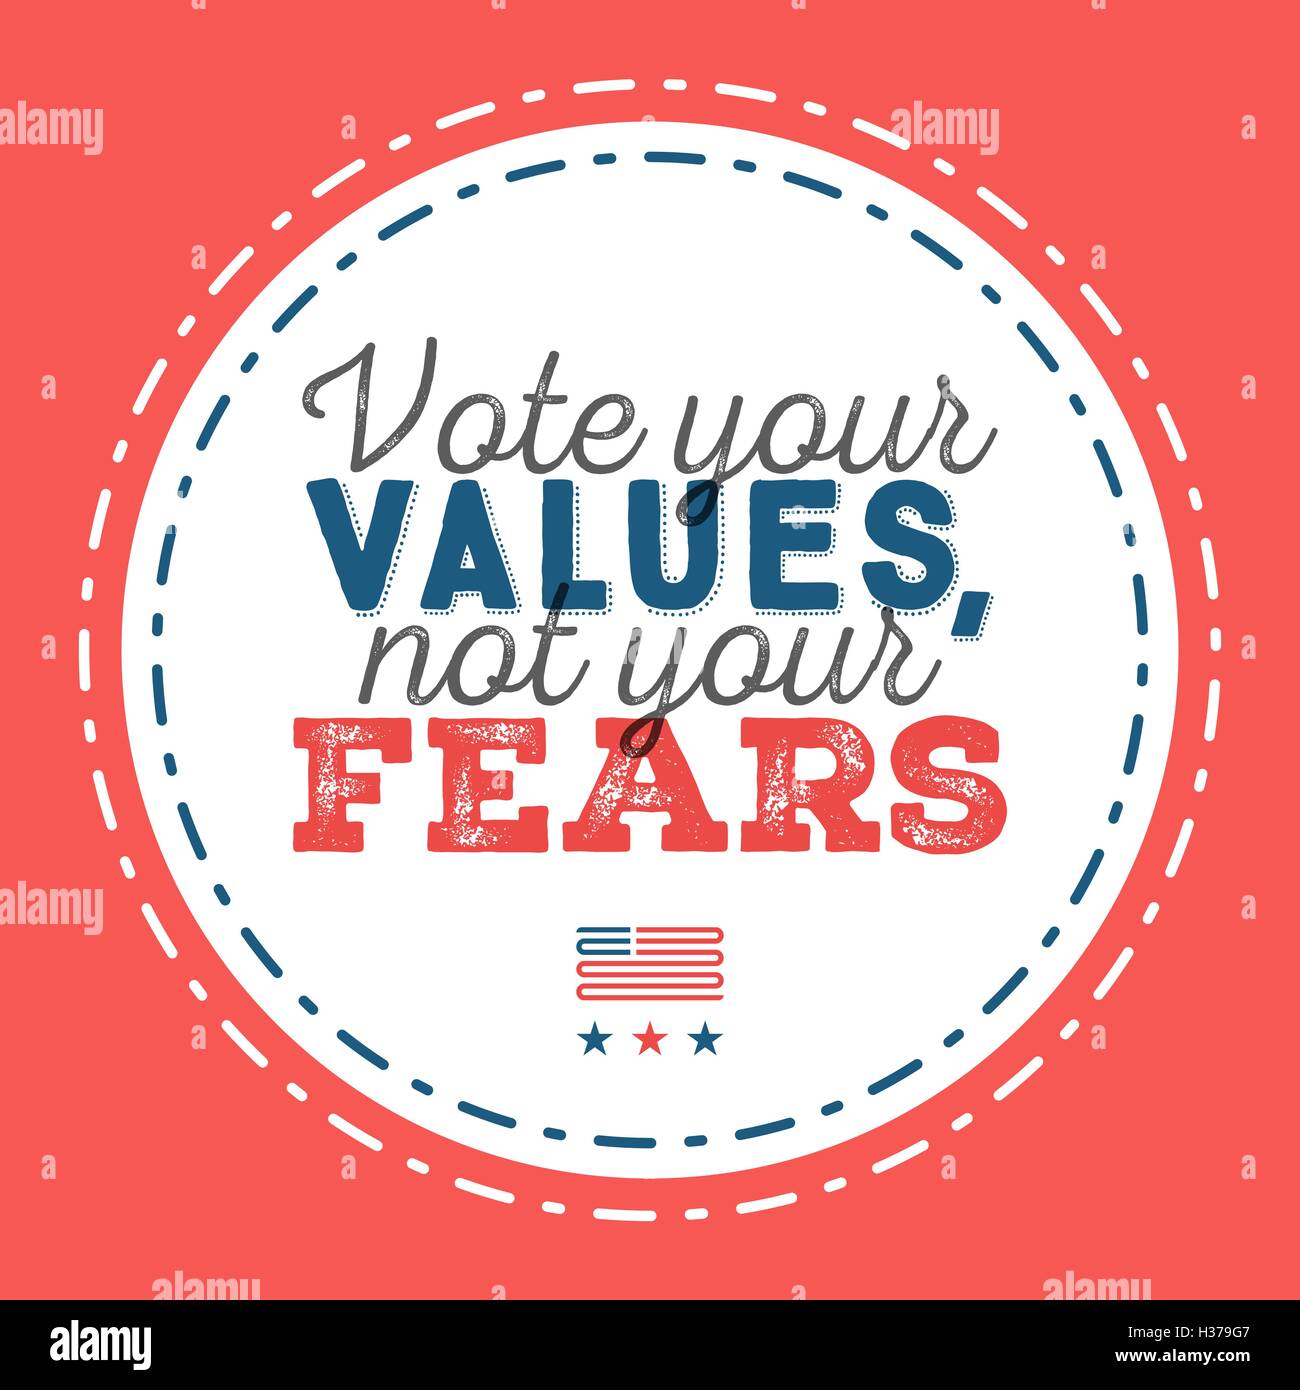 Vote your values not your fears